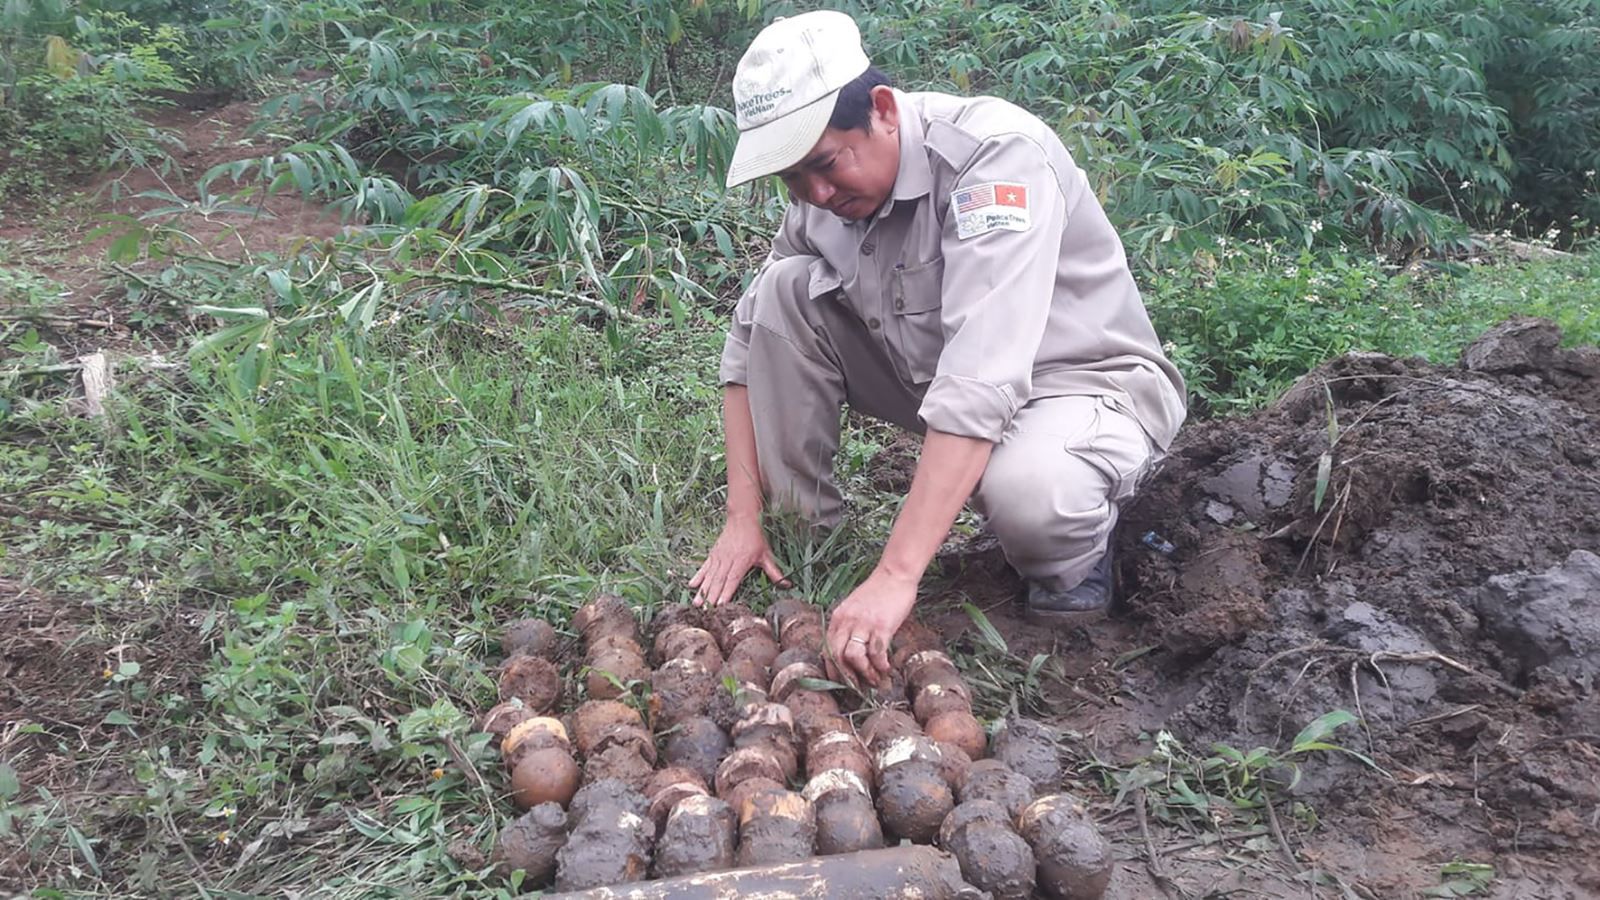 300 explosive devices safely destroyed by PeaceTrees’ team